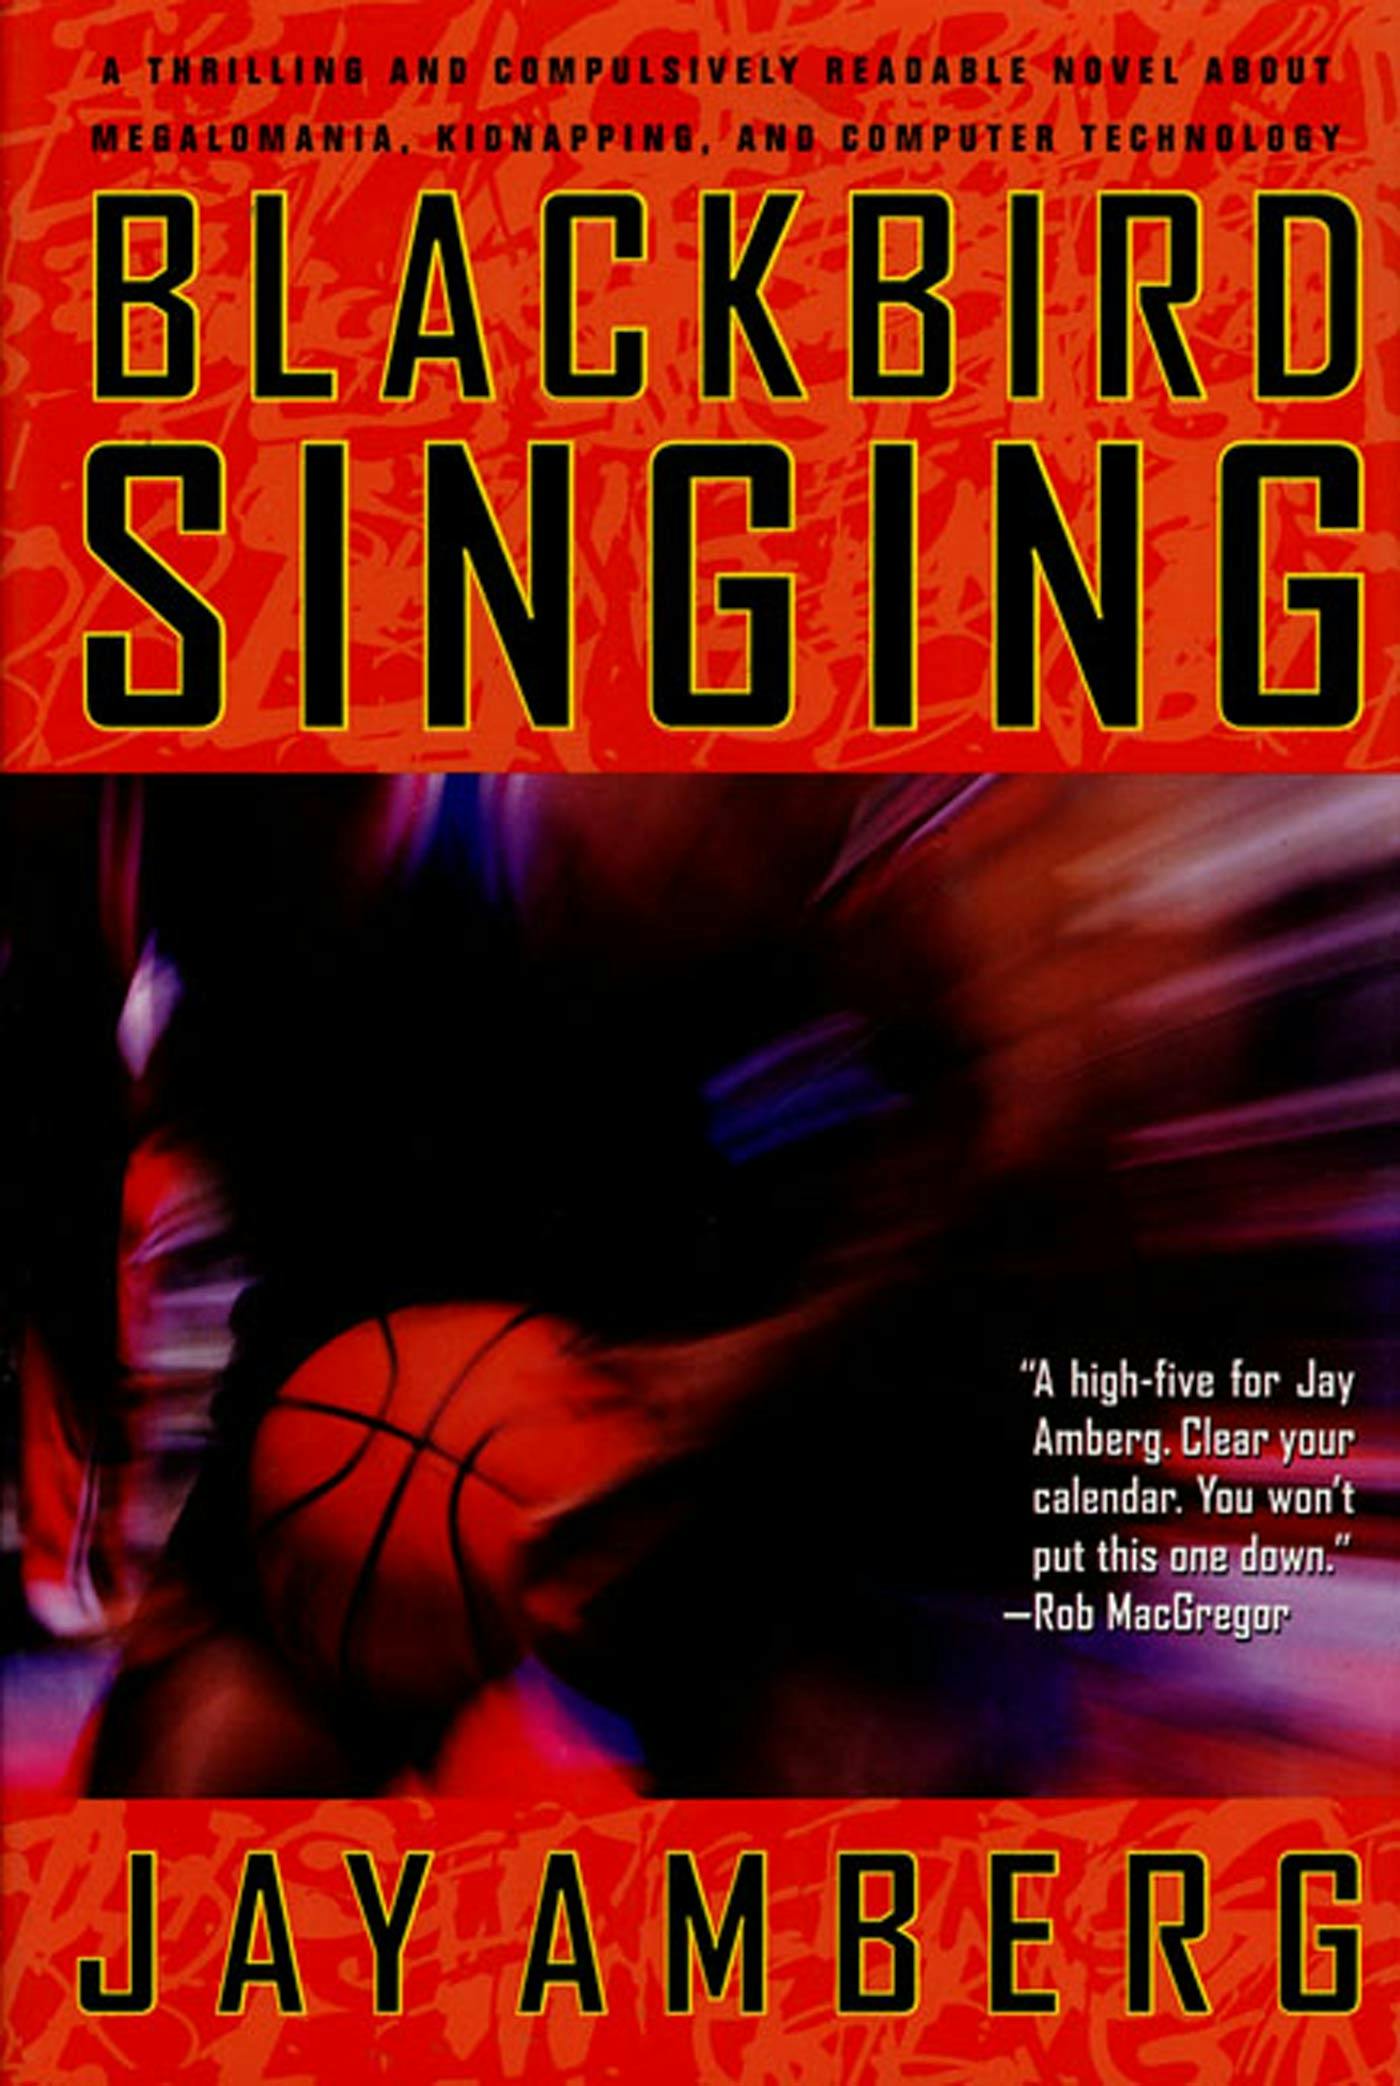 Cover for the book titled as: Blackbird Singing